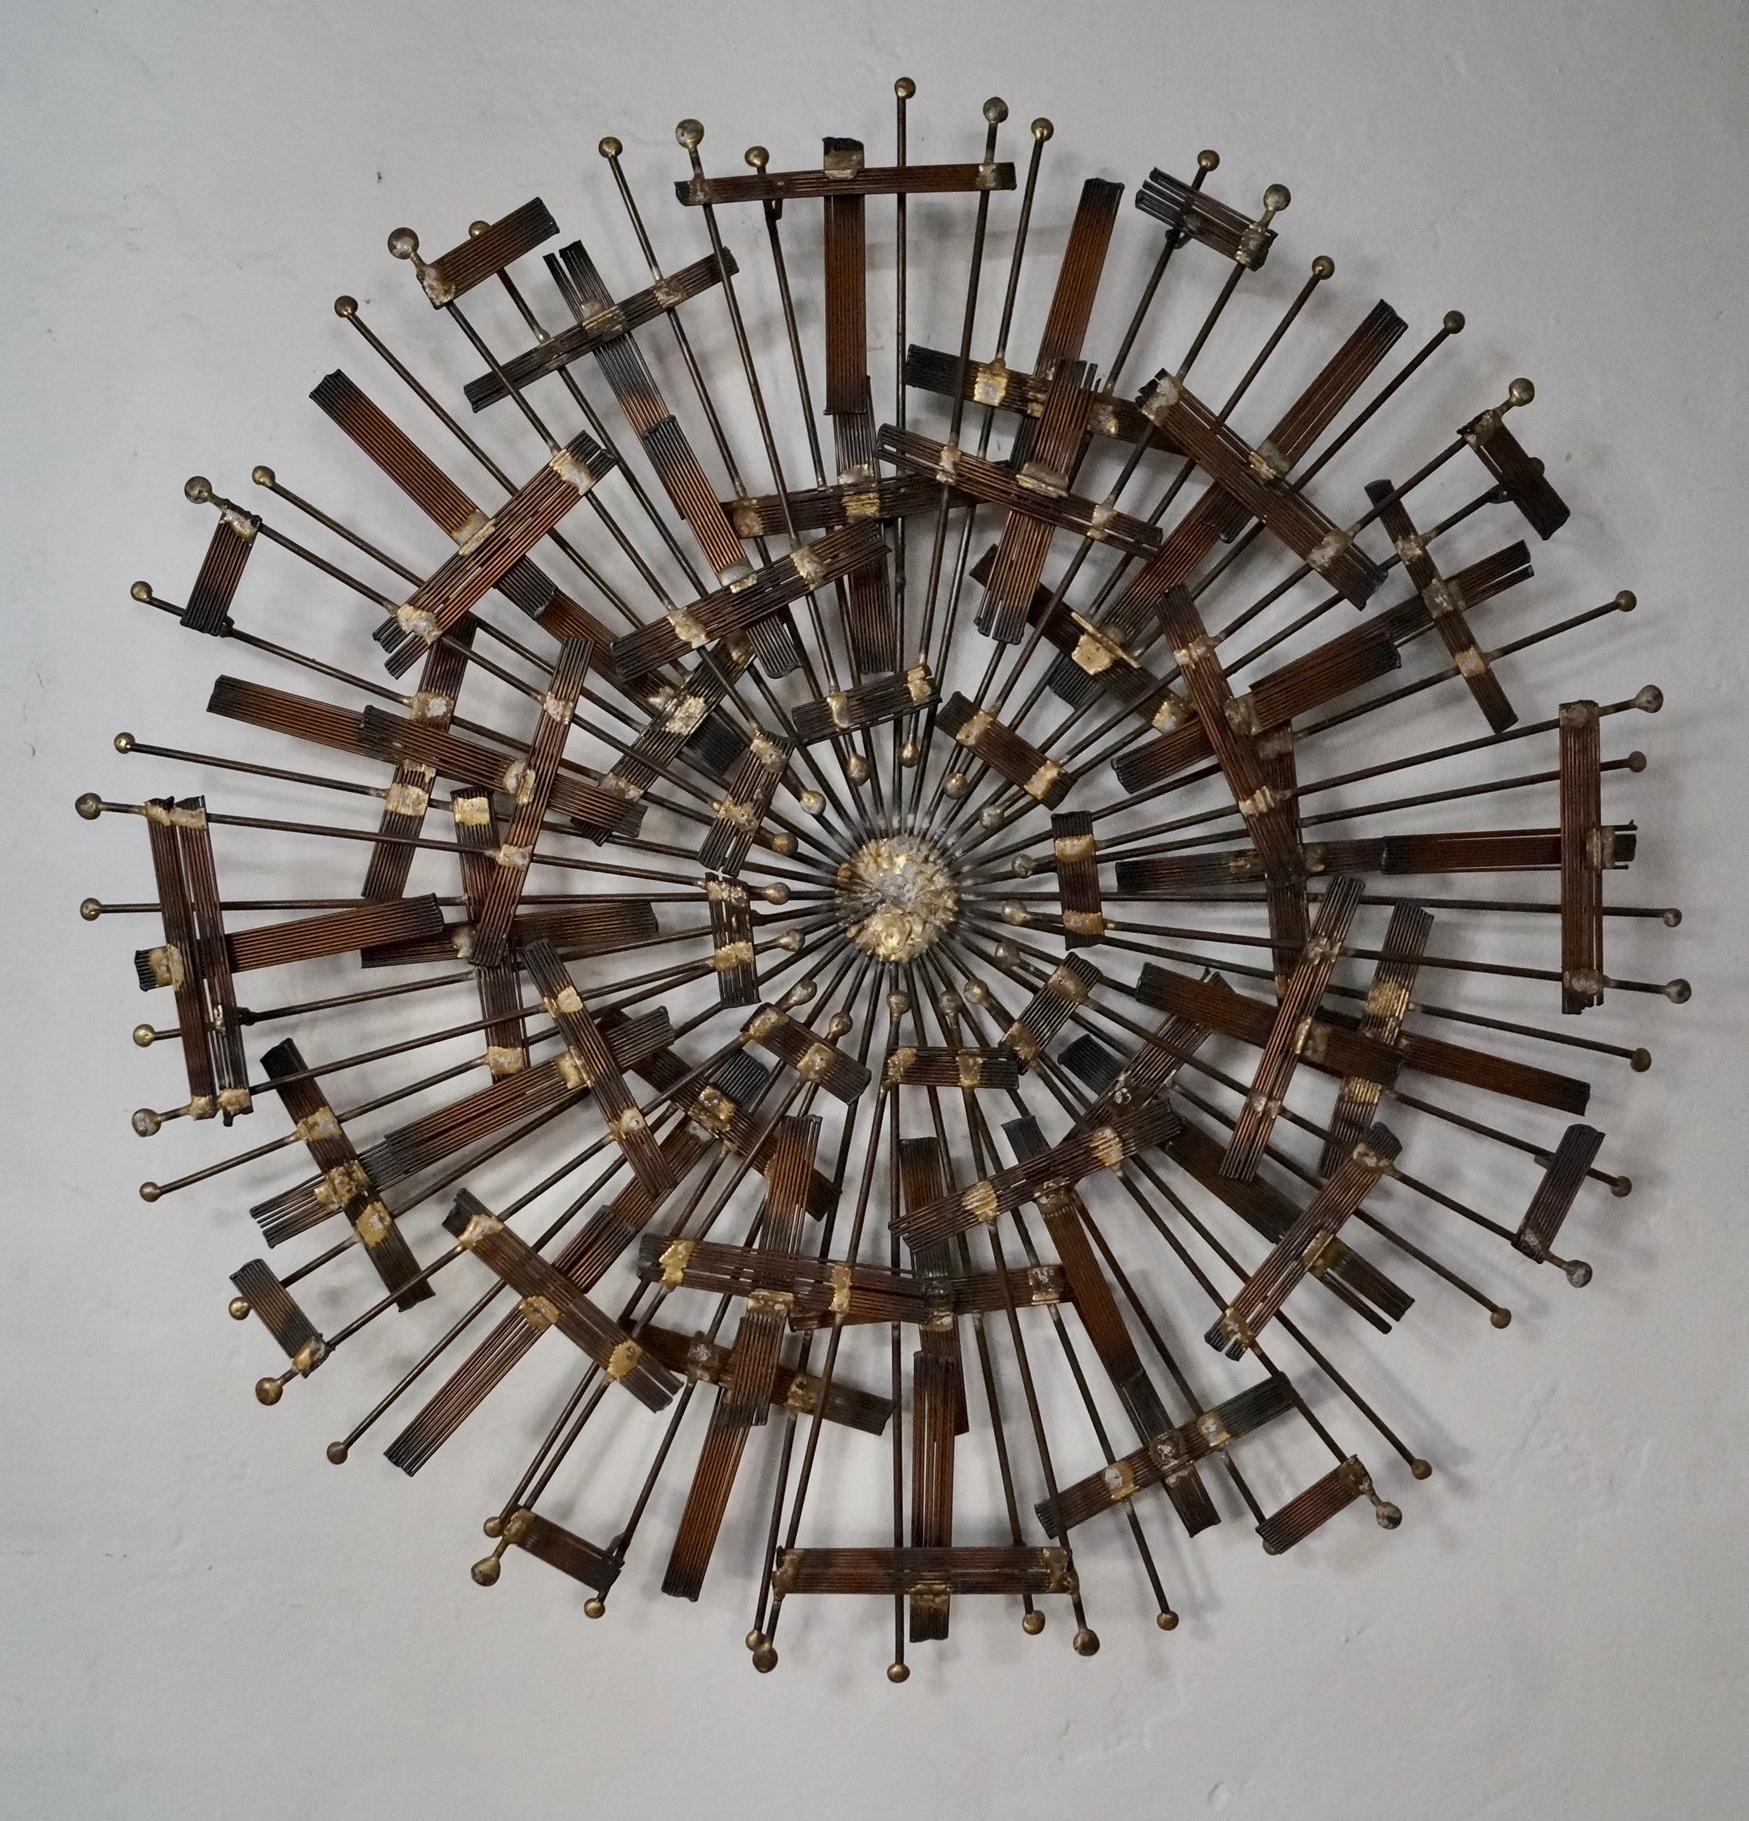 We have this stunning original Brutalist Midcentury Modern designer wall art piece for sale. It's an original piece of brutalist wall art, and dates back to the 1960's. It's rare, and truly a gem! It's a sunburst, and is made of metal with solid